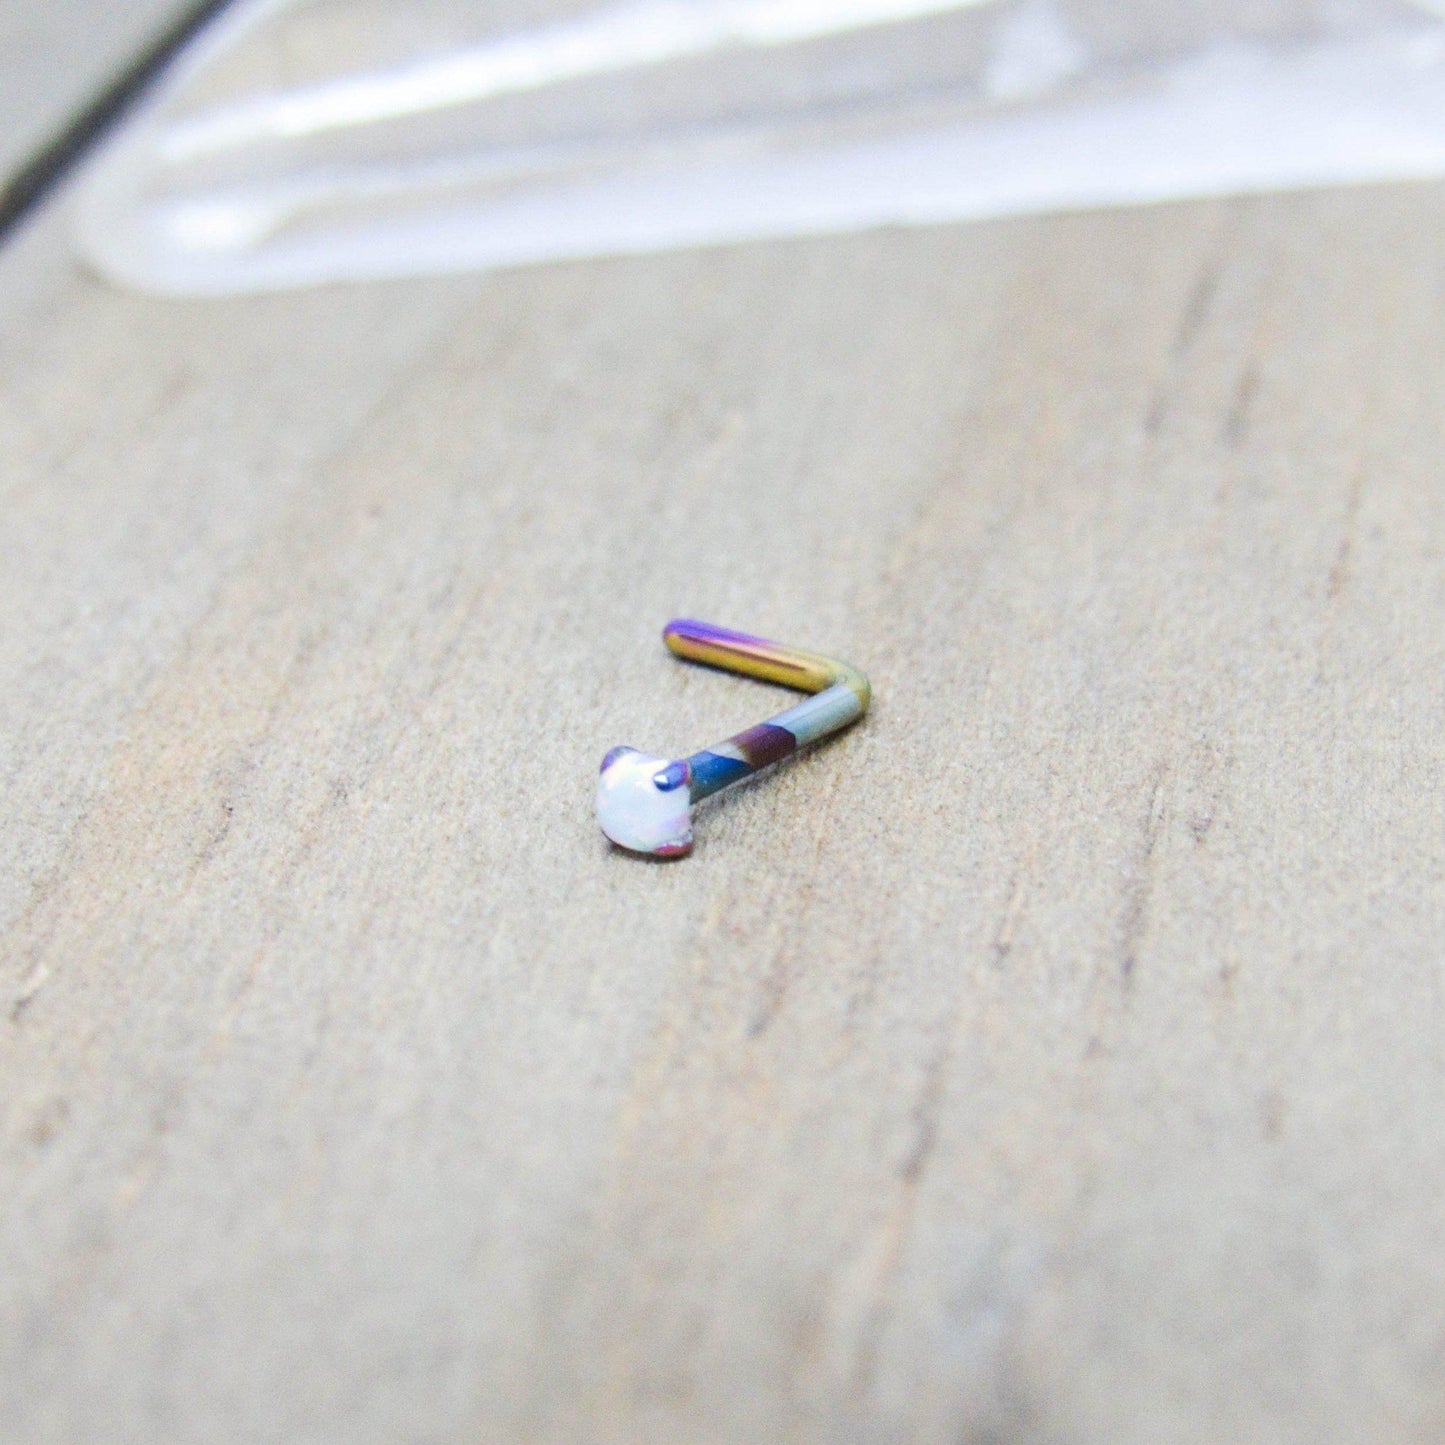 20g Opal nose ring L bend white or purple opal titanium 2mm opal prong set pick your anodized color - SirenBodyJewelry